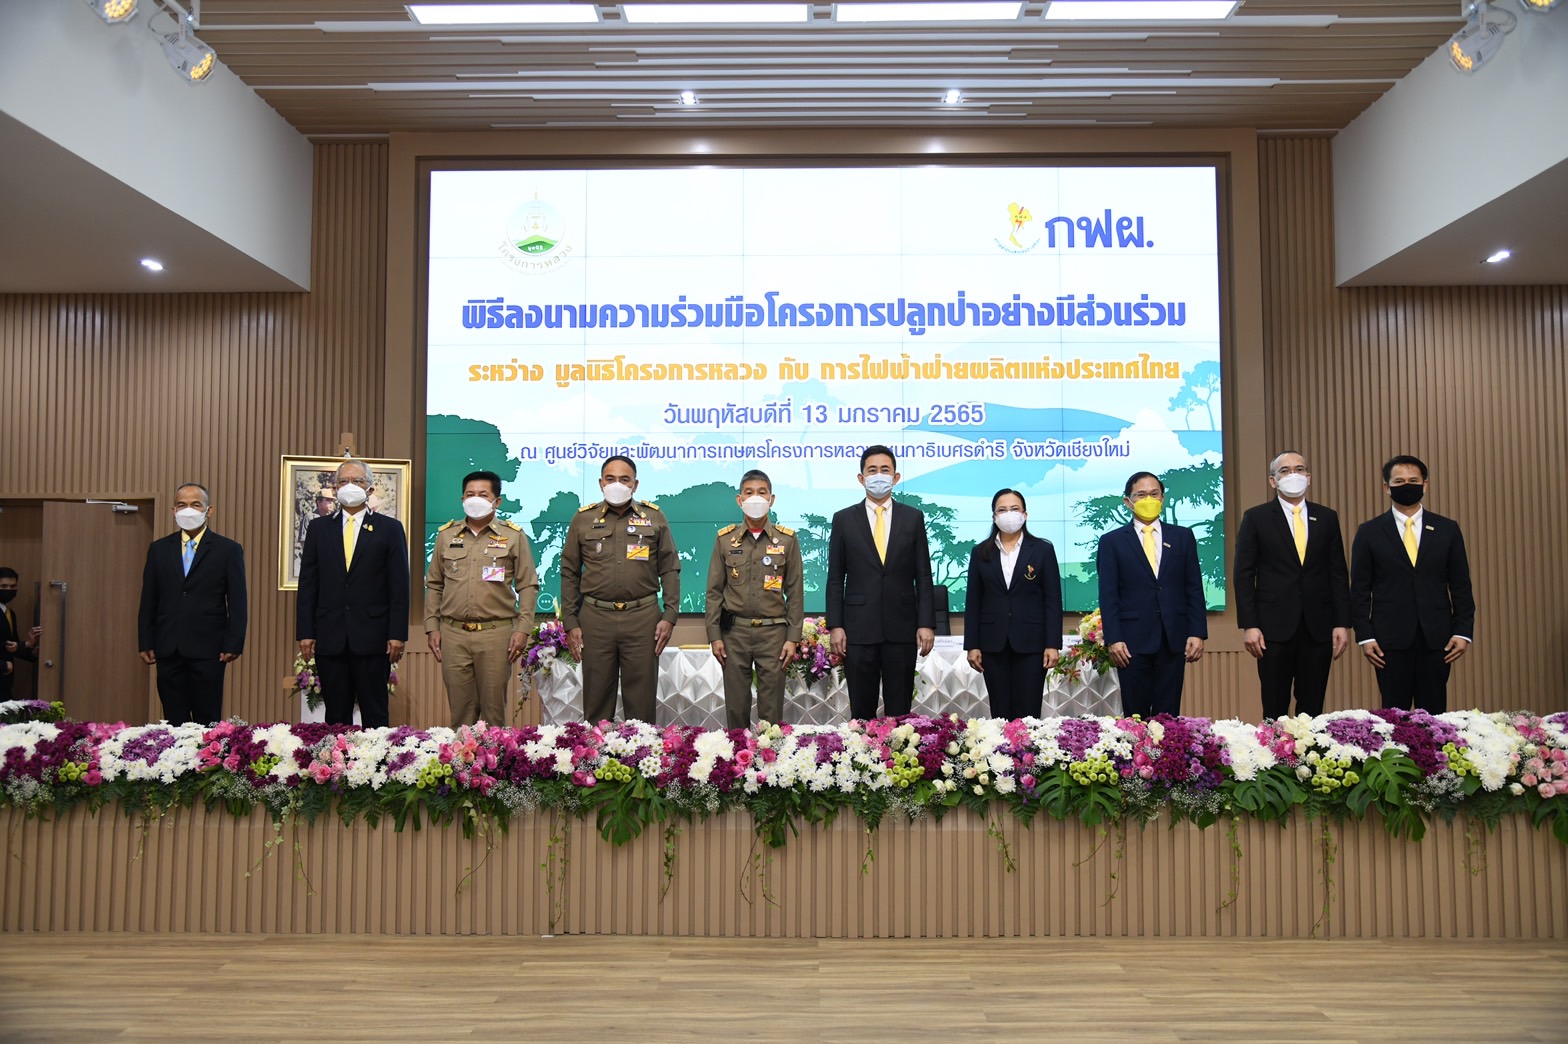 Royal Project Foundation and EGAT expand participatory reforestation to create community income and sustainable coexistence with nature